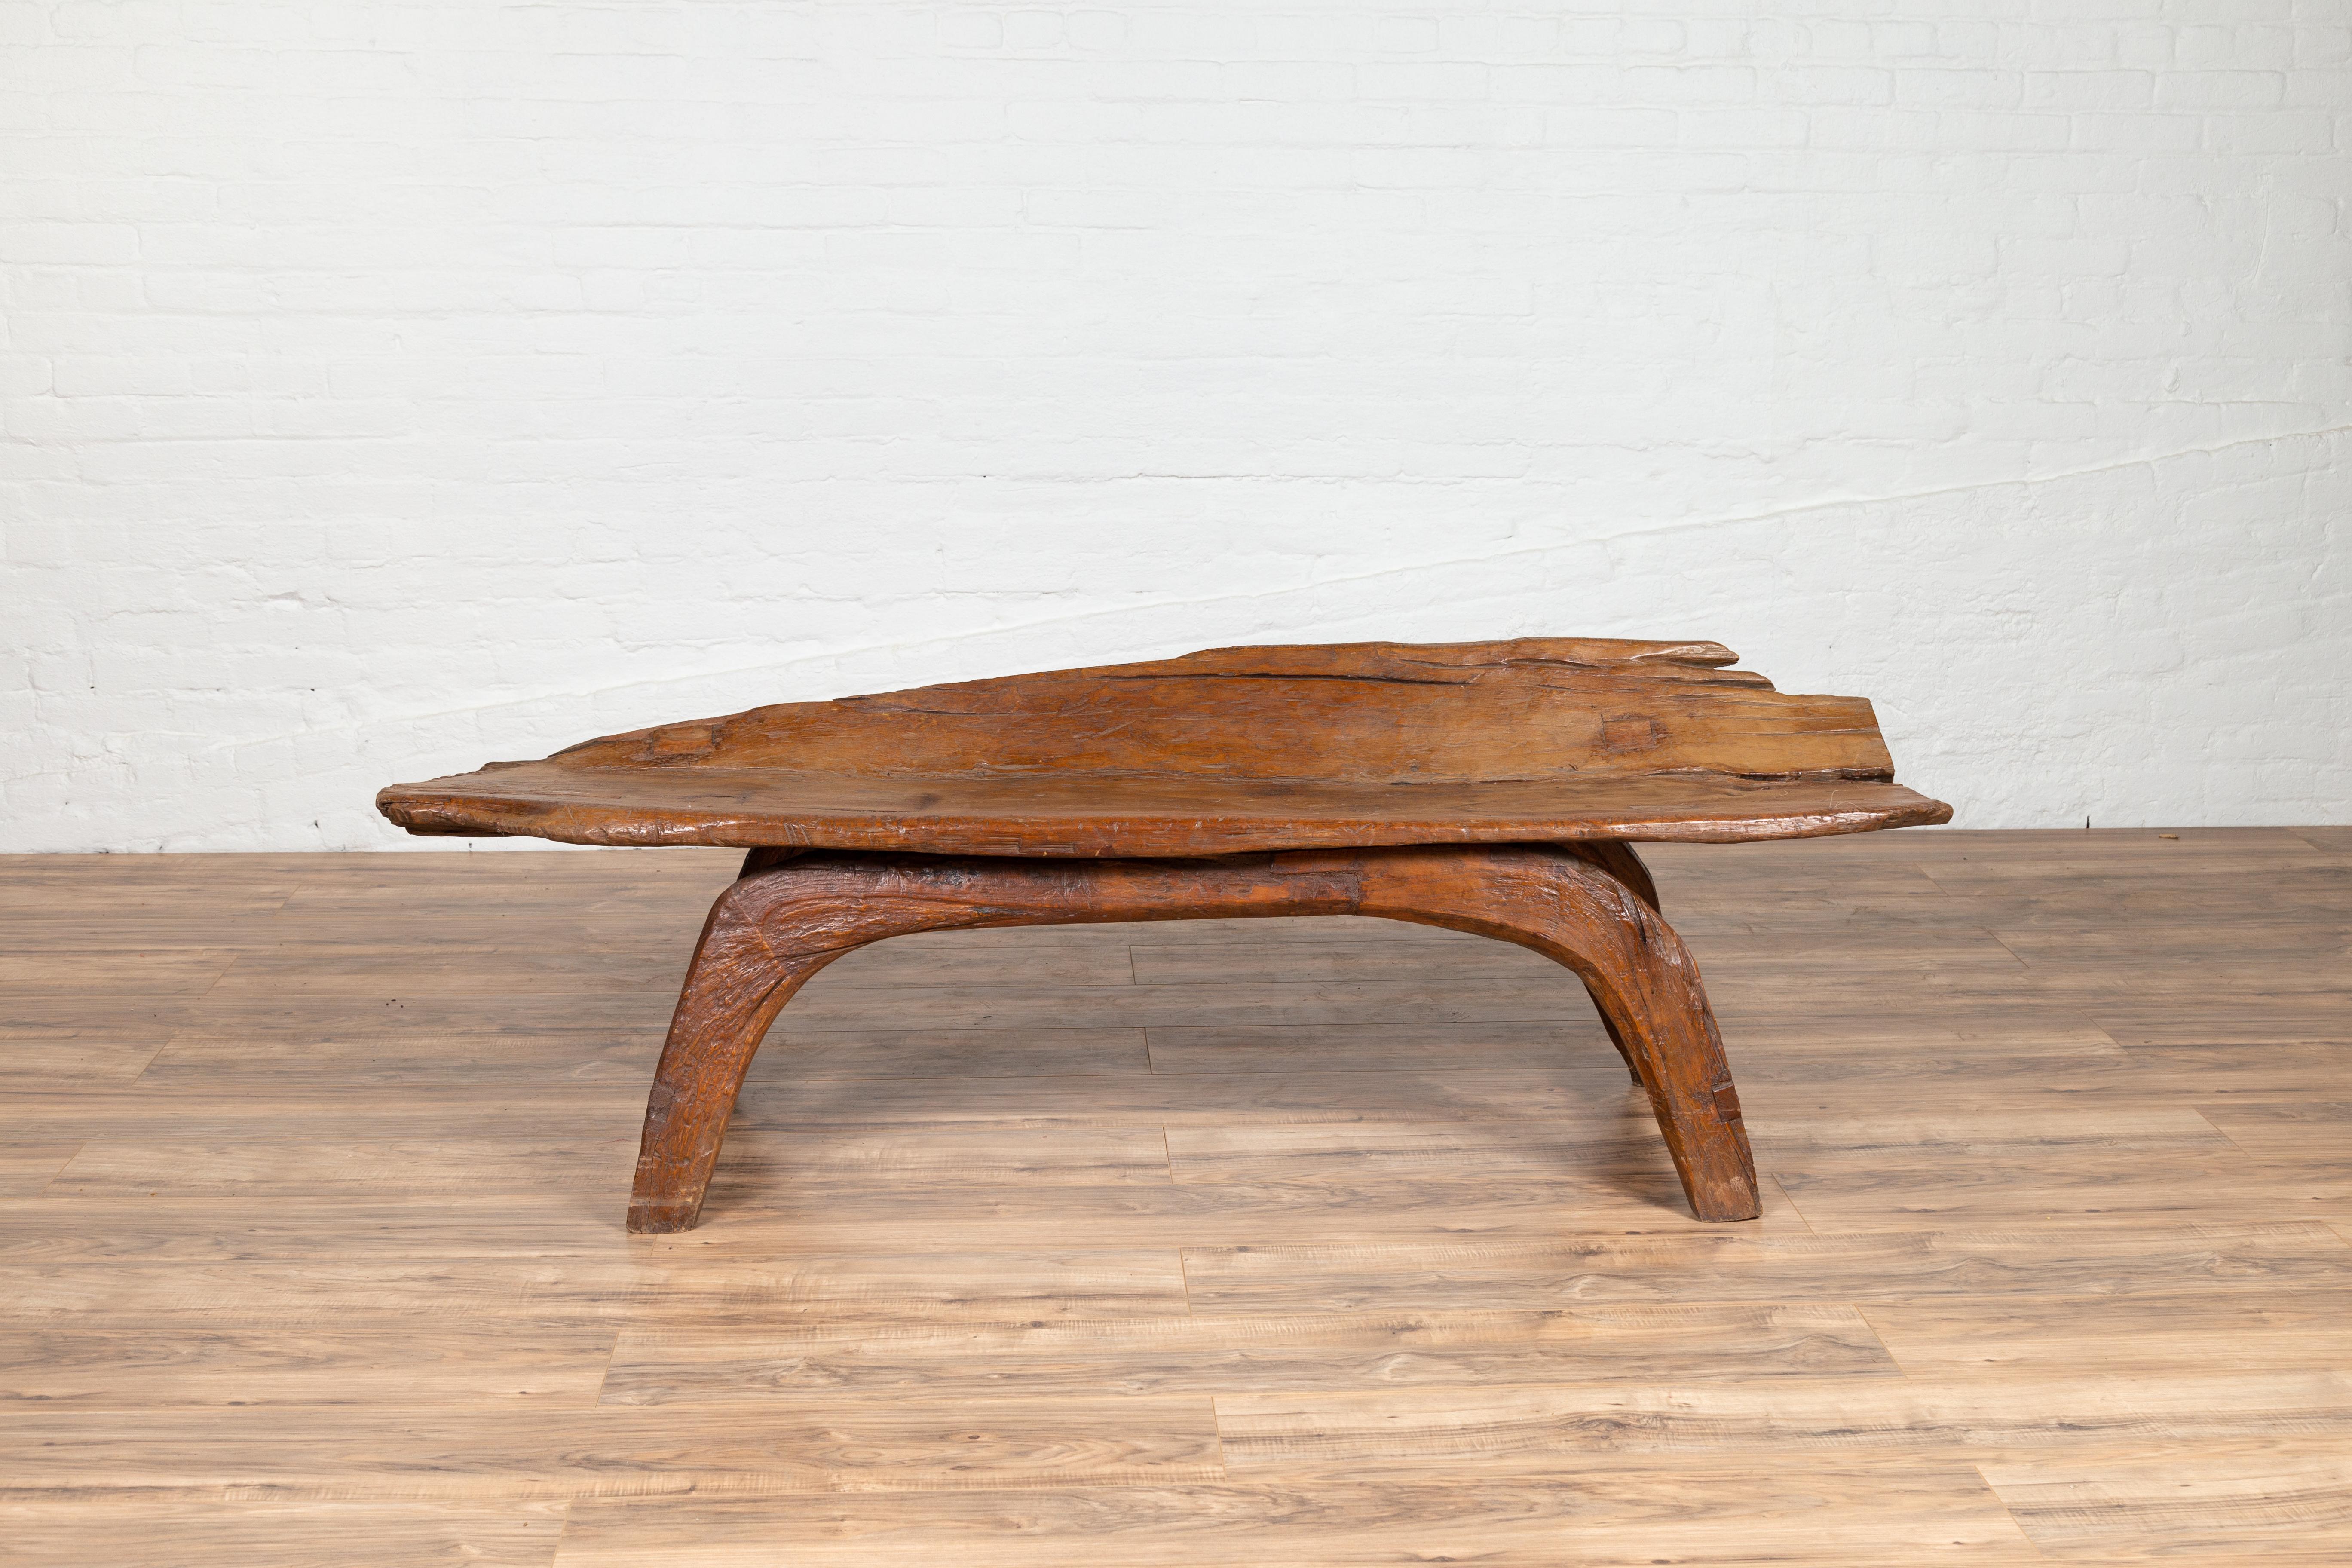 An antique freeform design Indonesian wooden bench found in the riverbed of Bali. This charming wooden bench delights our eye with its freeform rustic design. Found in the riverbed of Bali, it presents a wooden seat capable of accommodating three